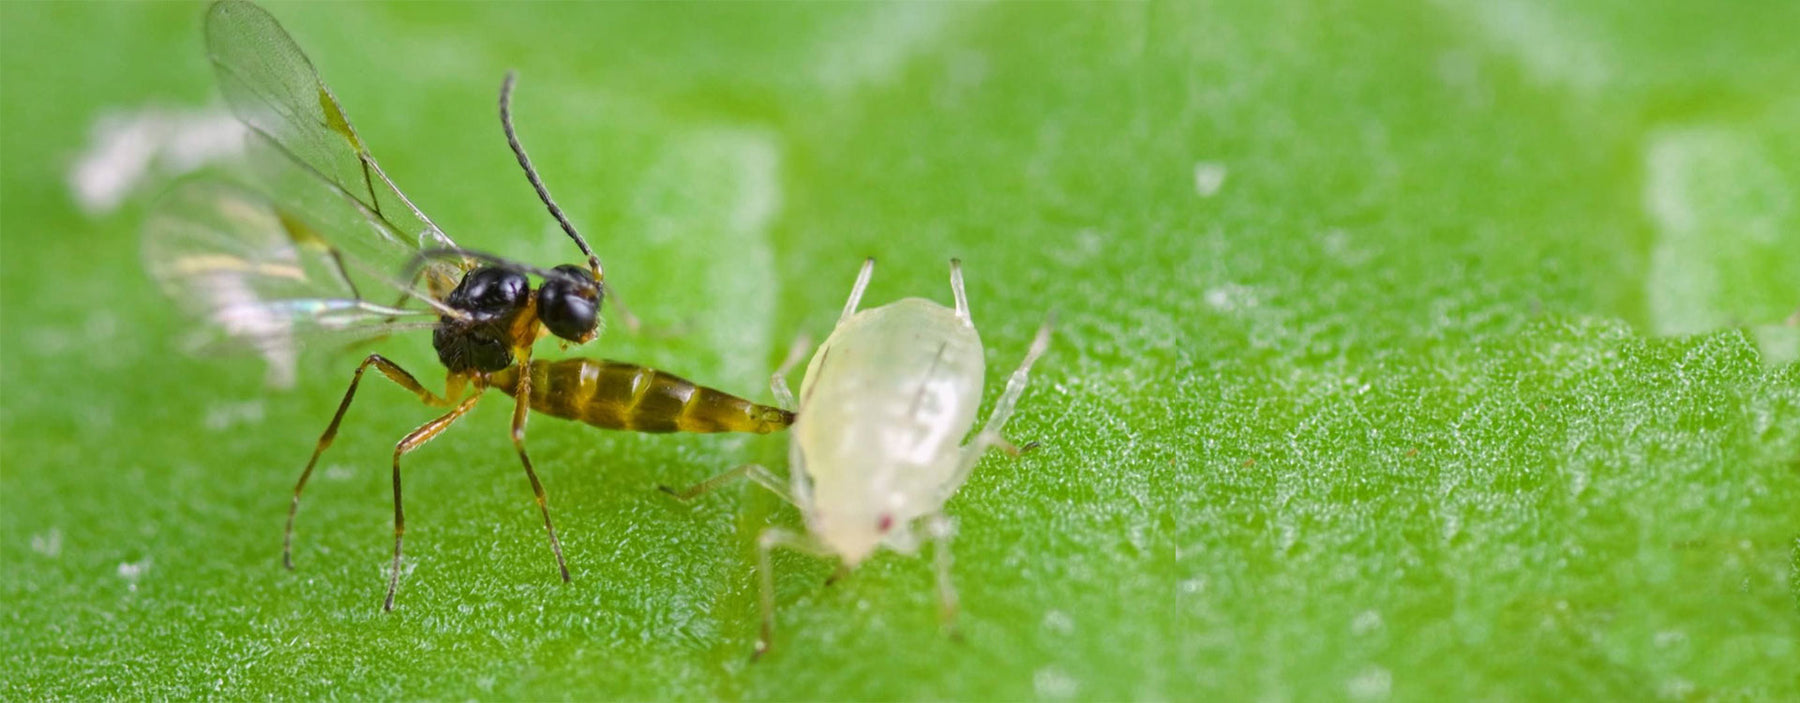 Whitefly attacked by a small parasitic wasp